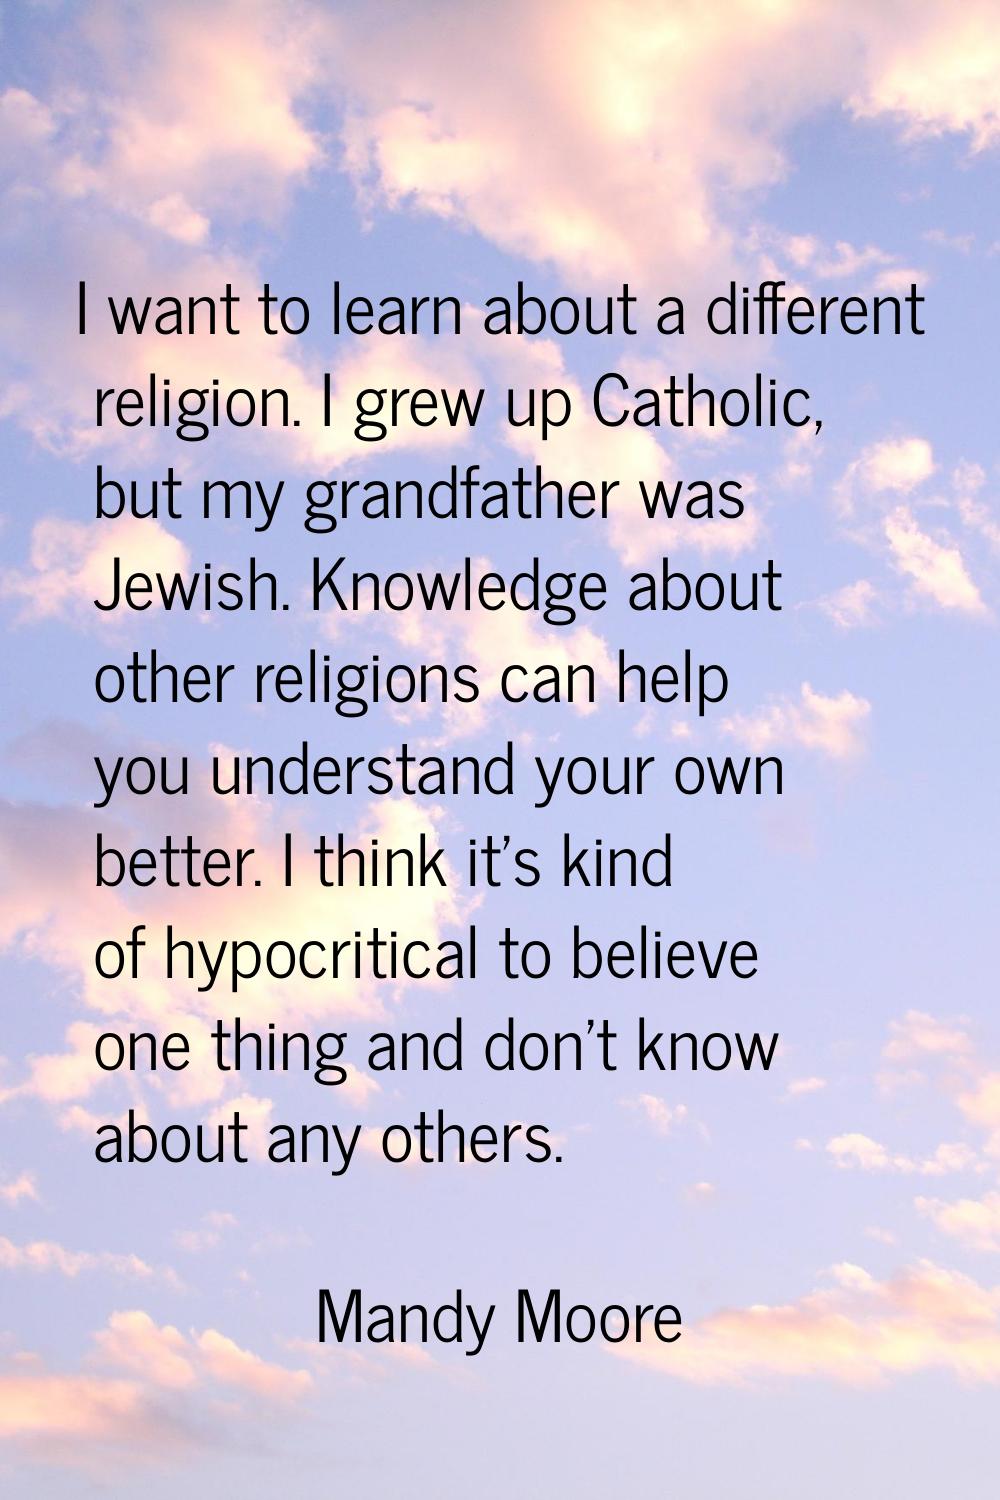 I want to learn about a different religion. I grew up Catholic, but my grandfather was Jewish. Know